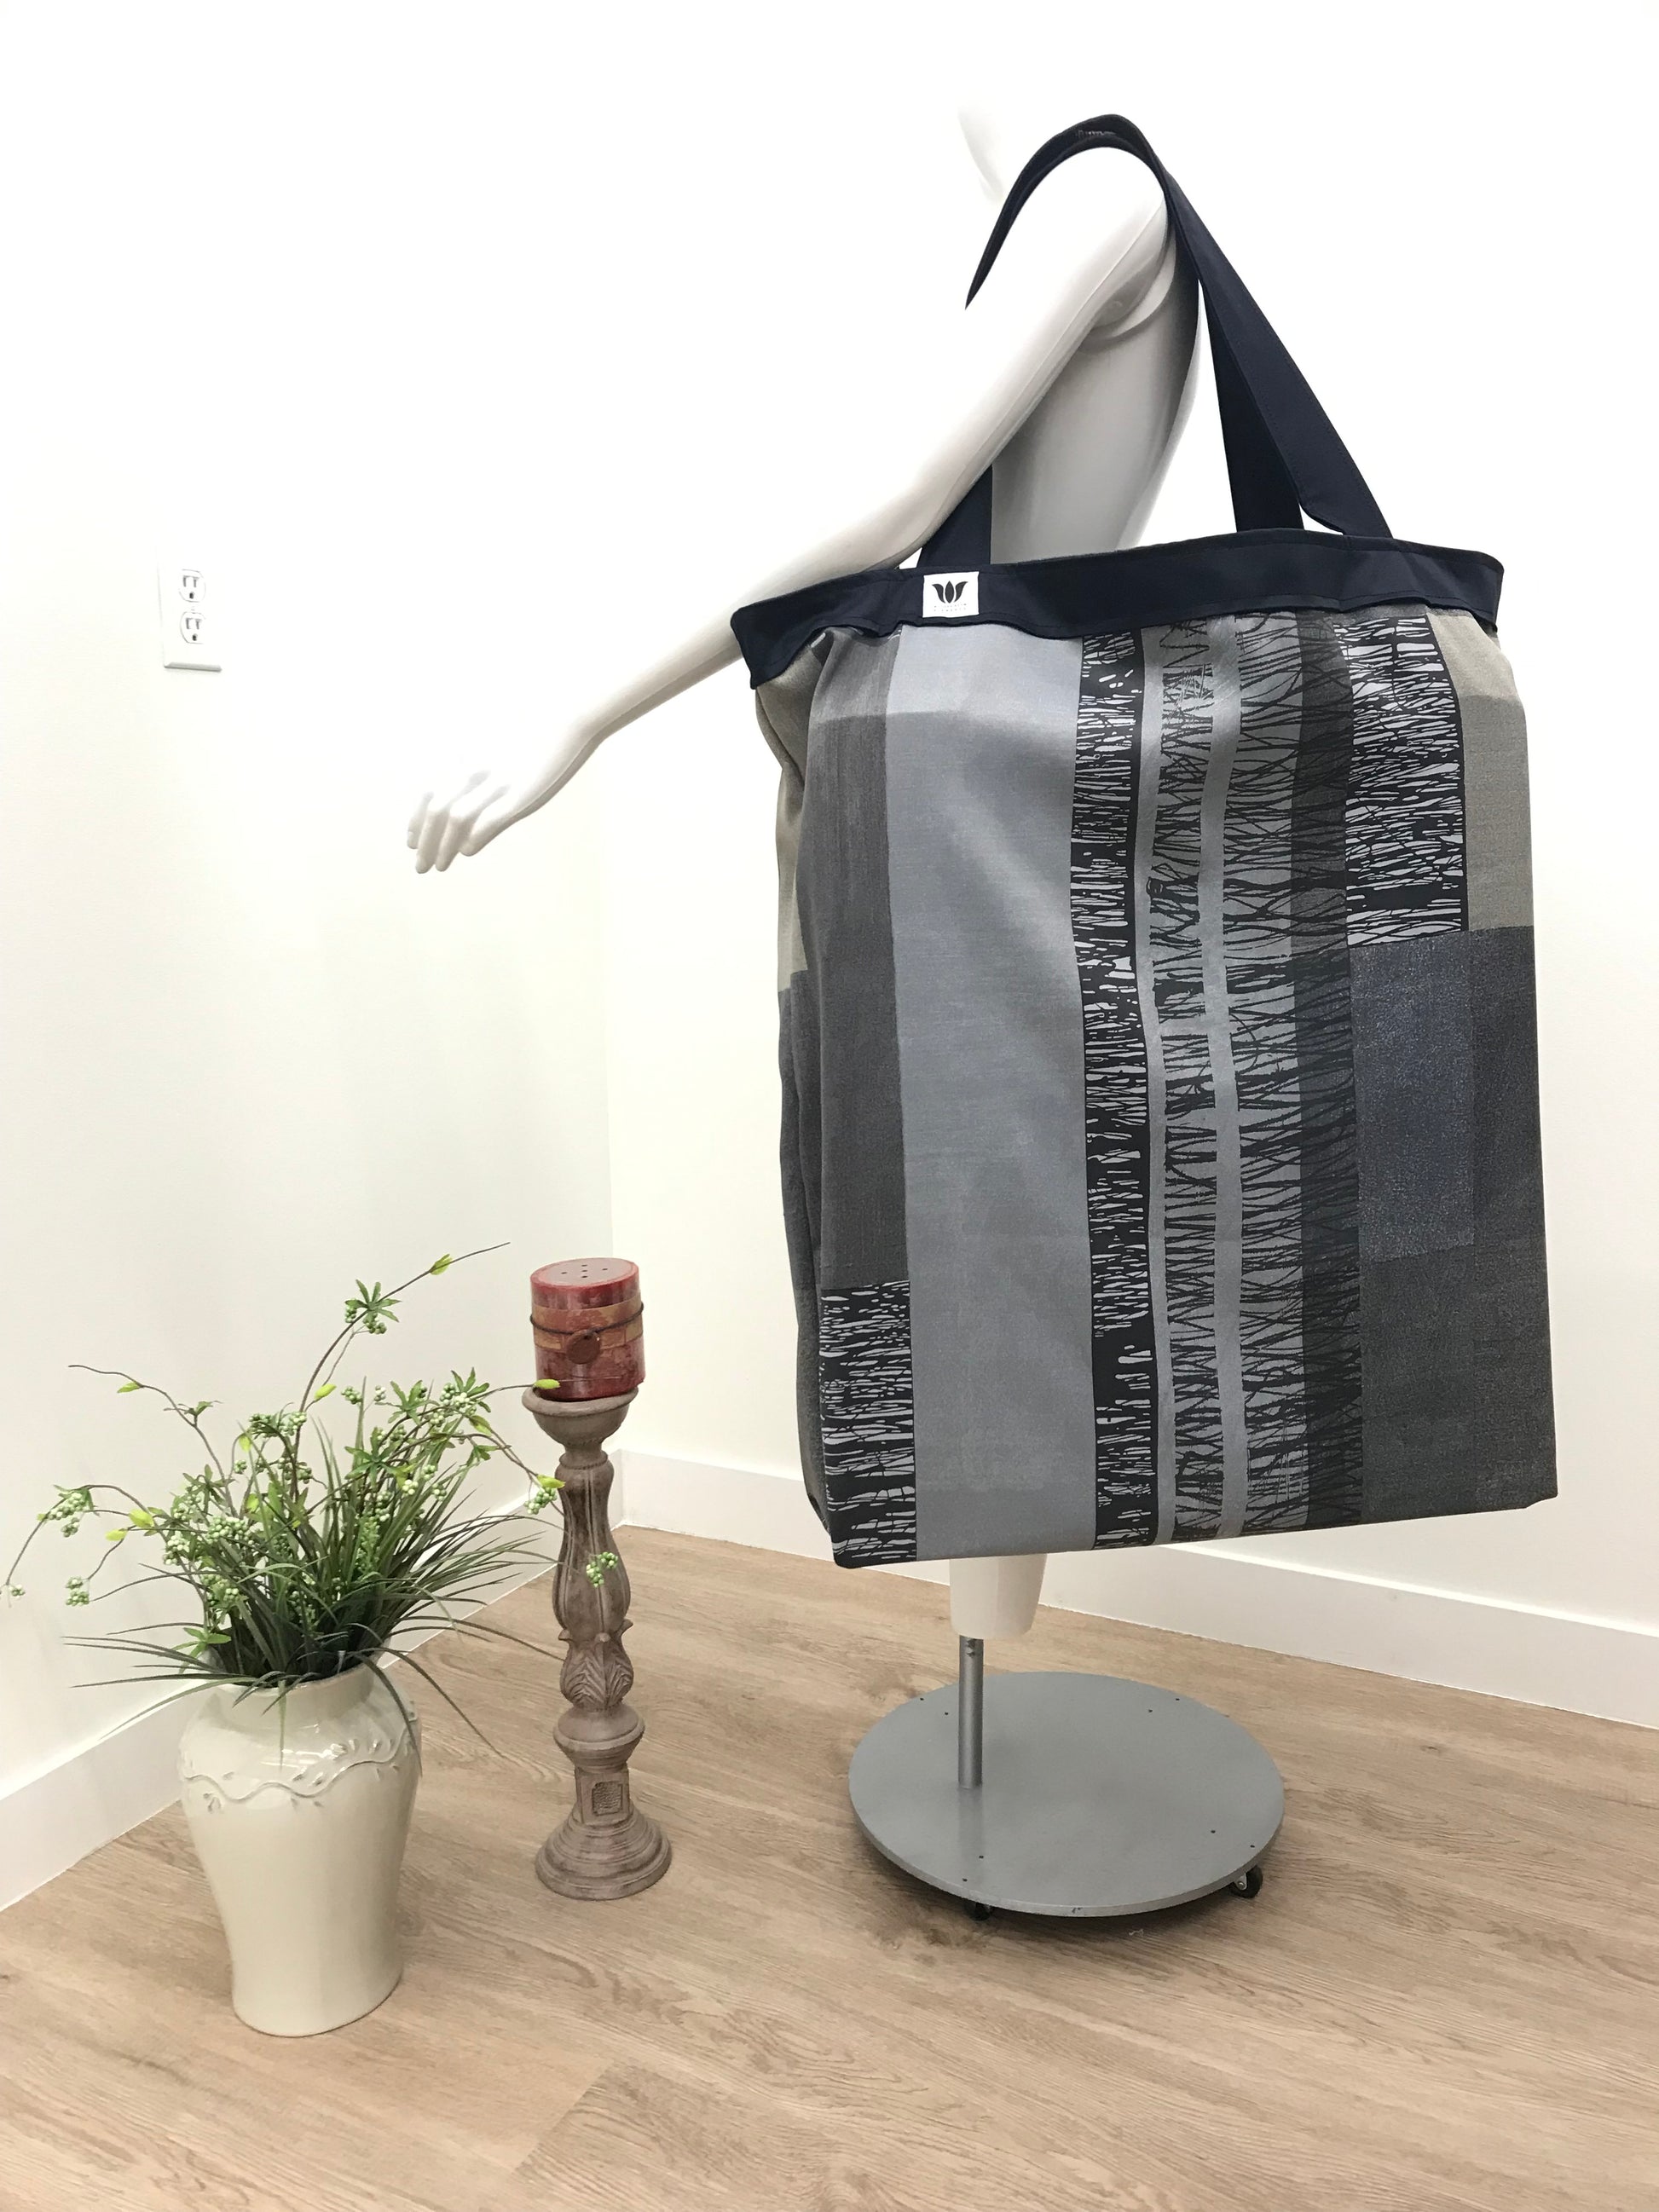 Extra Large Yoga Tote Bag in blue and grey modern graphic print  fabric to carry and or store yoga props for yoga practice. Made in Canada by My Yoga Room Elements